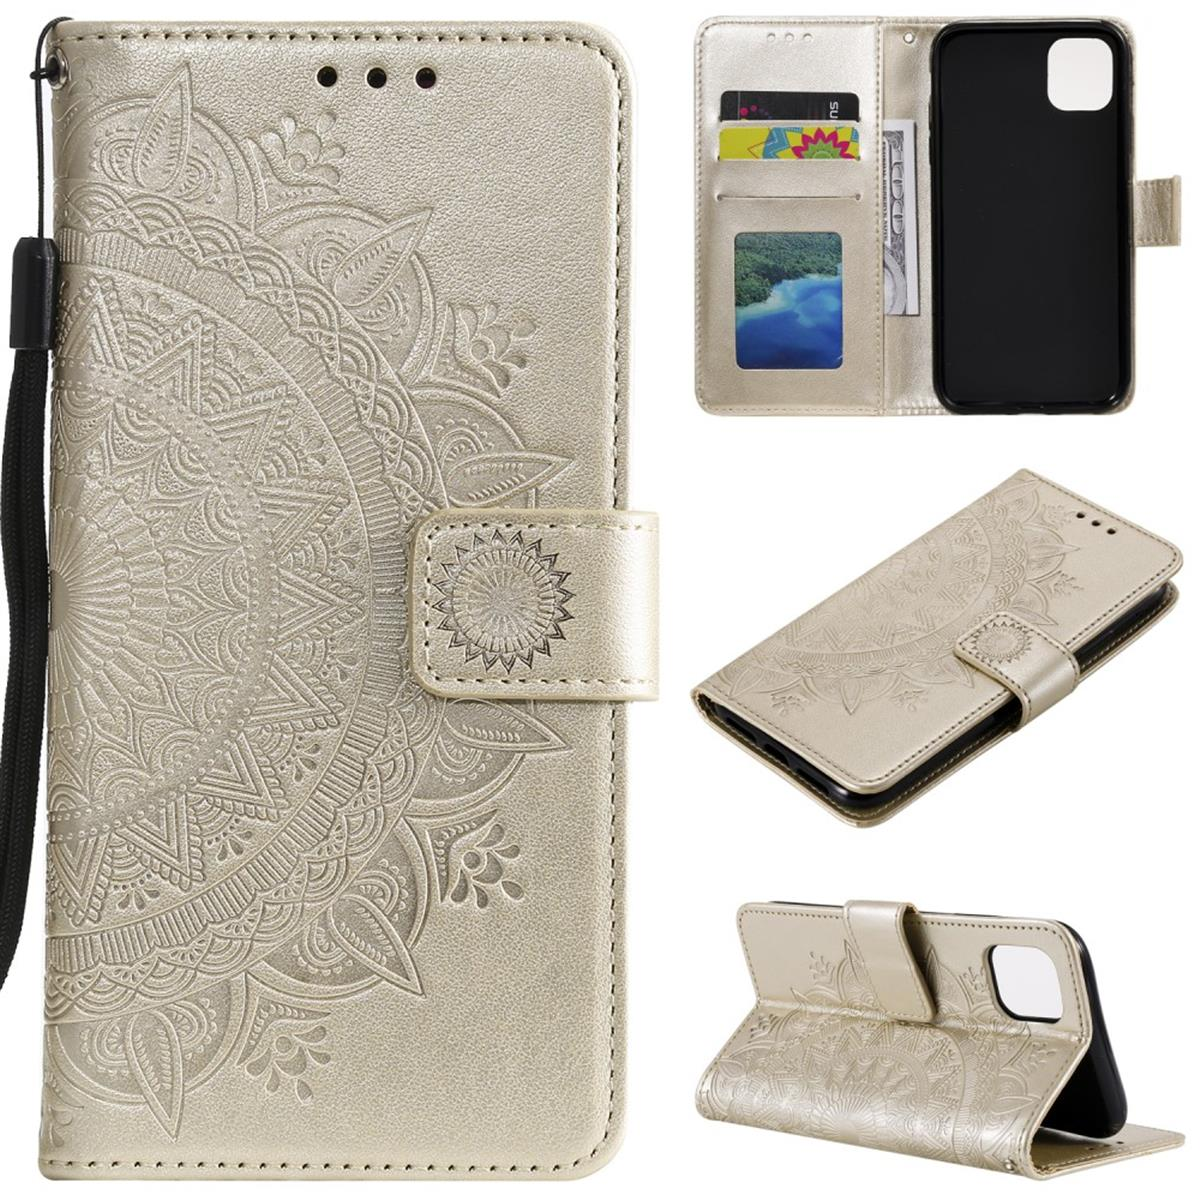 Klapphülle Bookcover, Gold Mandala Muster, 11, iPhone mit Apple, COVERKINGZ